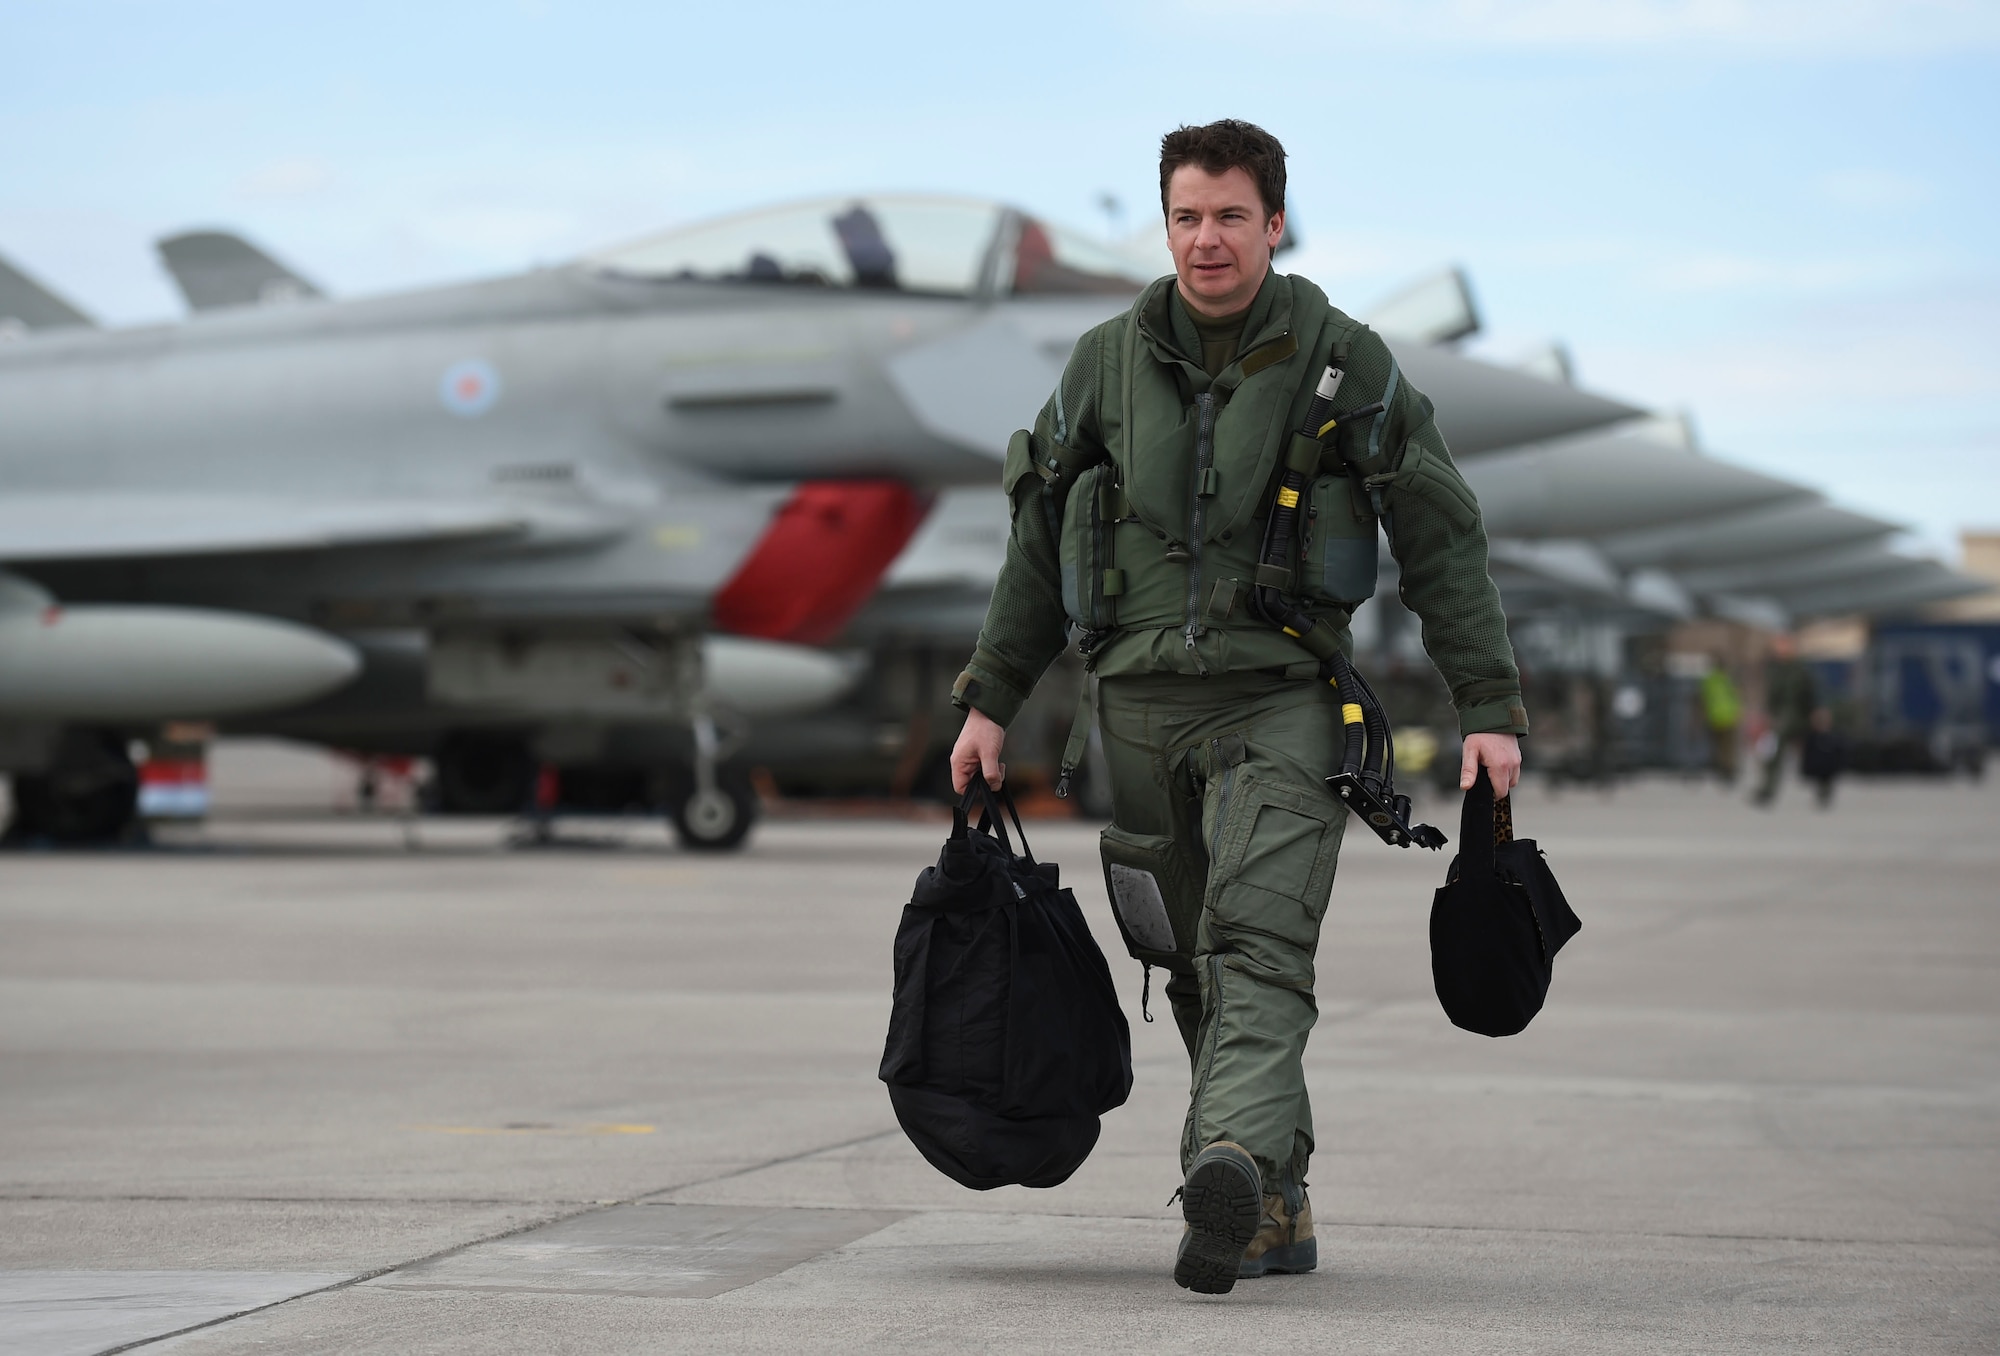 Royal Air Force Flight Lt. Jonny Mulhall, 6th Squadron Eurofighter Typhoon pilot, walks to his aircraft during Red Flag 17-1 at Nellis Air Force Base, Nev., Feb. 7, 2017. The Royal Air Force and Australian Air Force participated in 17-1 alongside their U.S. partners to enhance tactics, techniques and procedures in air, space and cyber domains. (U.S Air Force photo by Staff Sgt. Natasha Stannard)